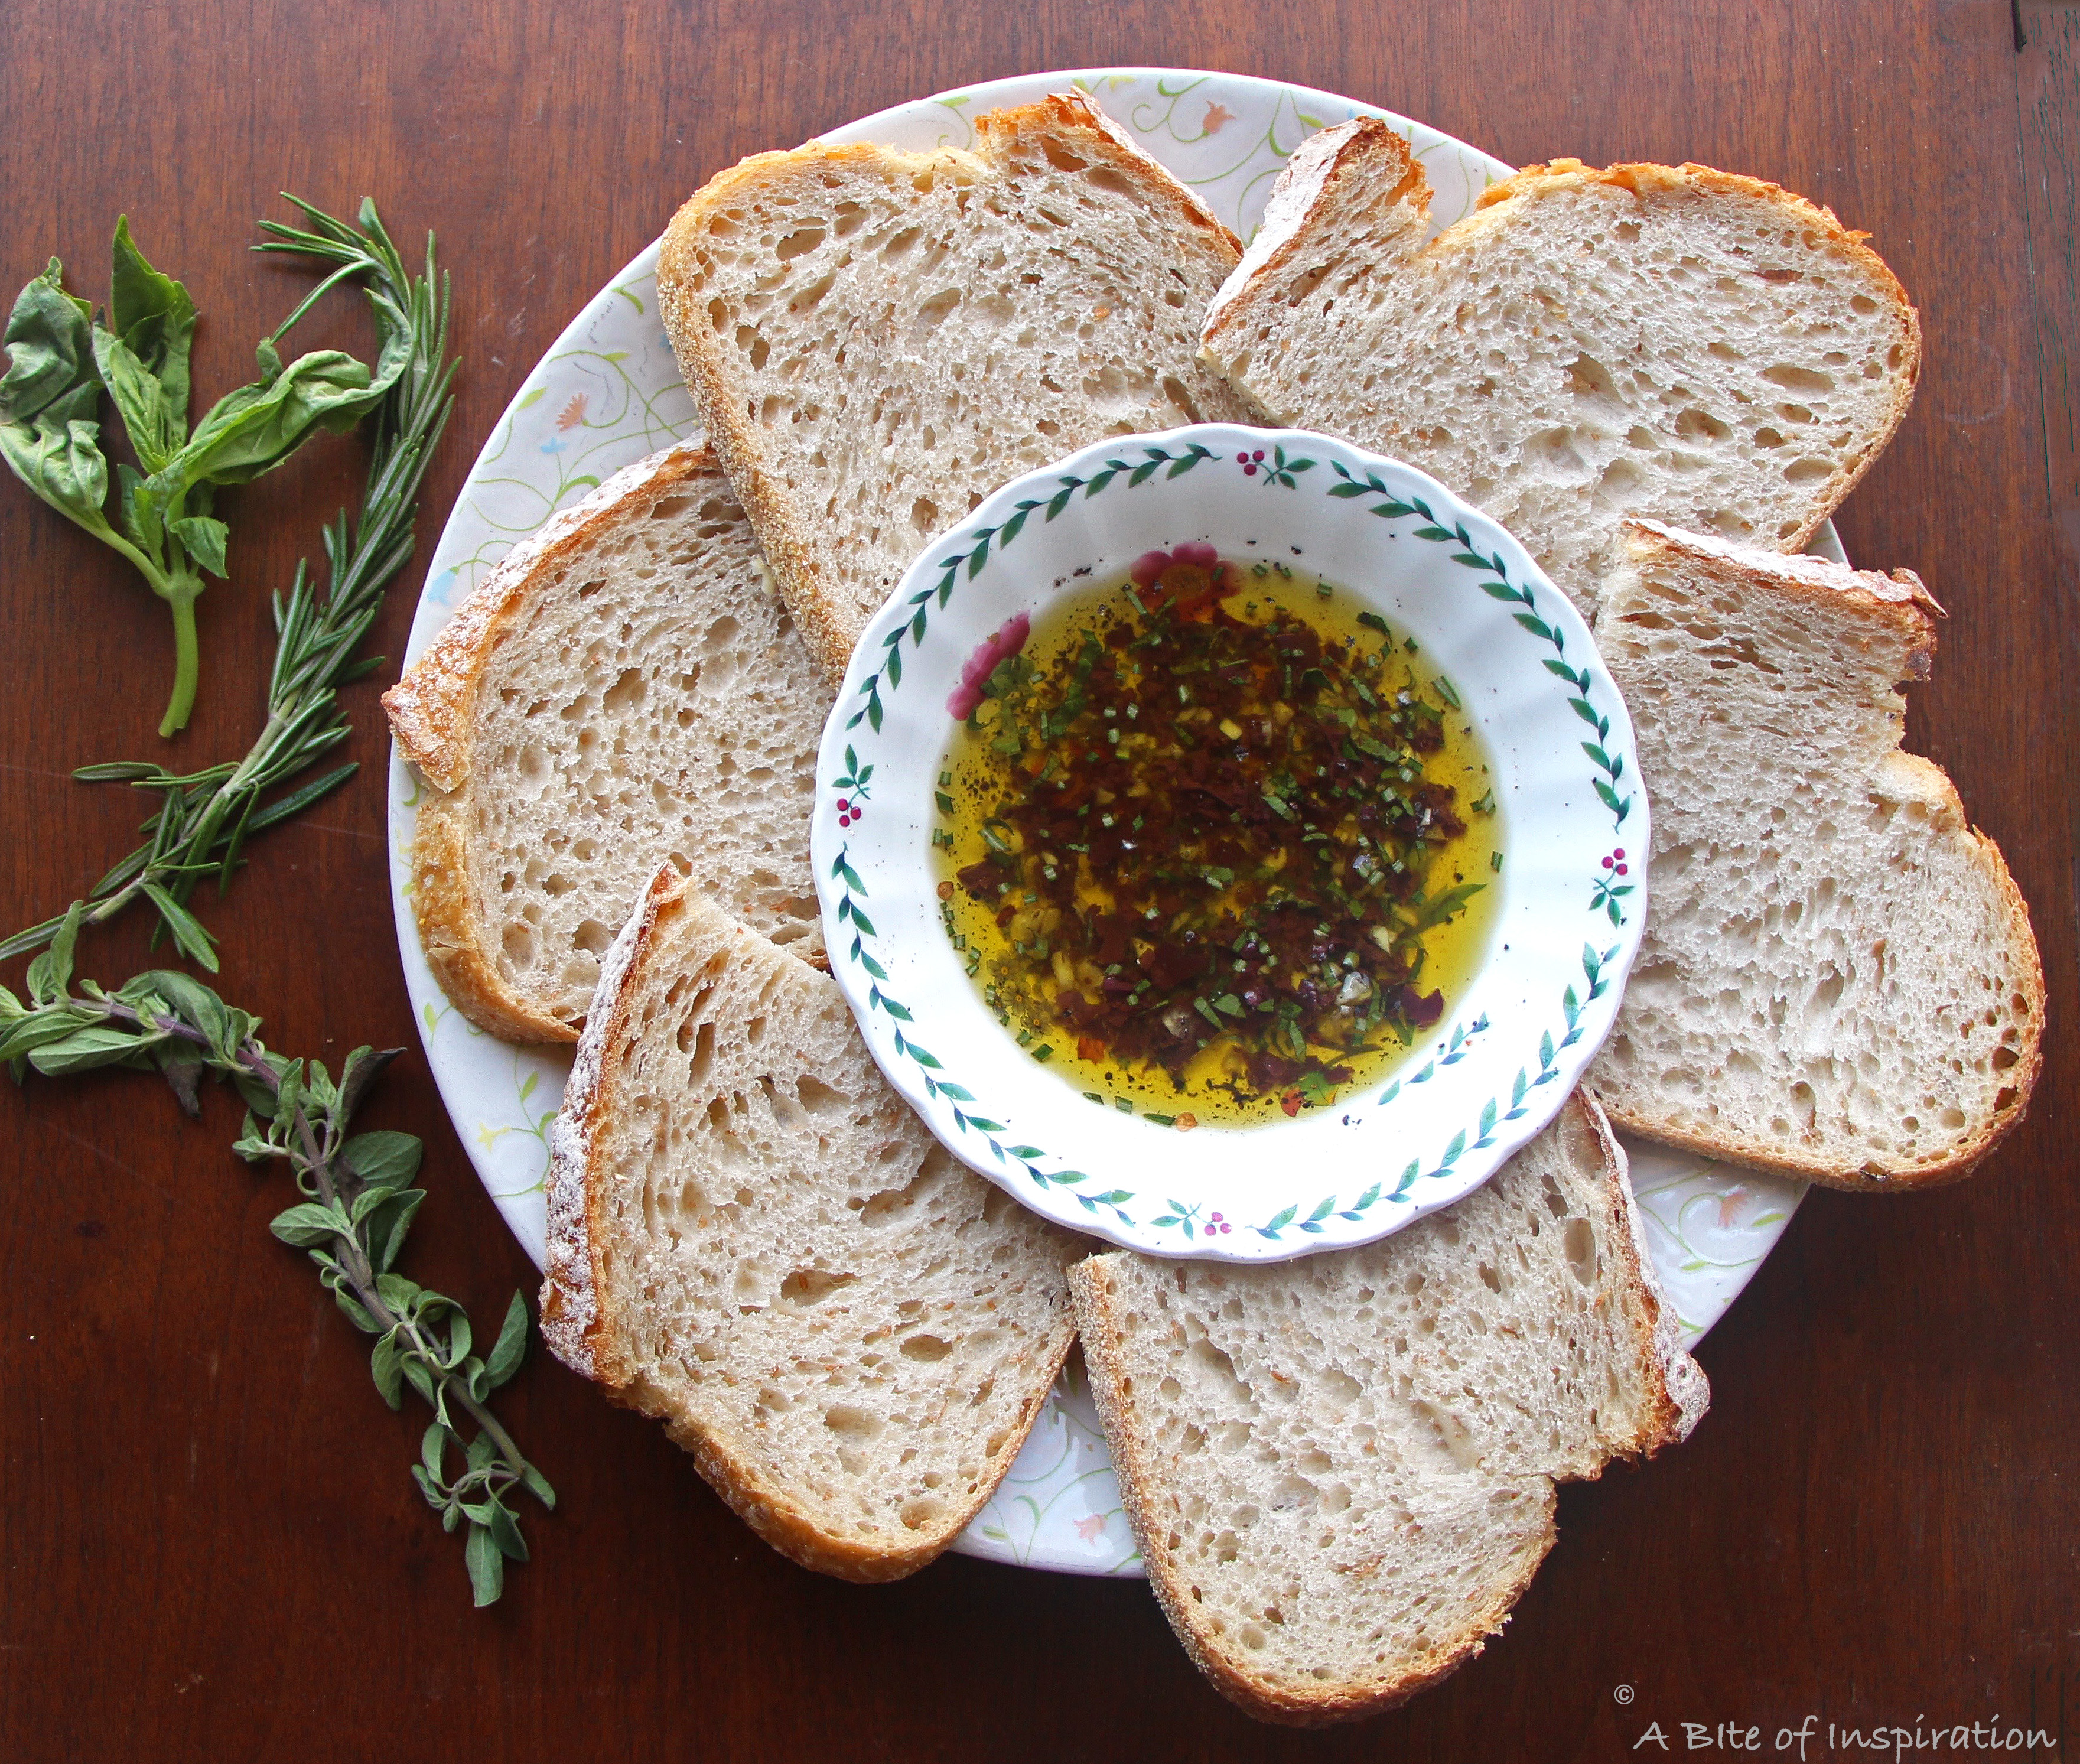 Olive Oil and Fresh Herb Sauce served with bread for dipping